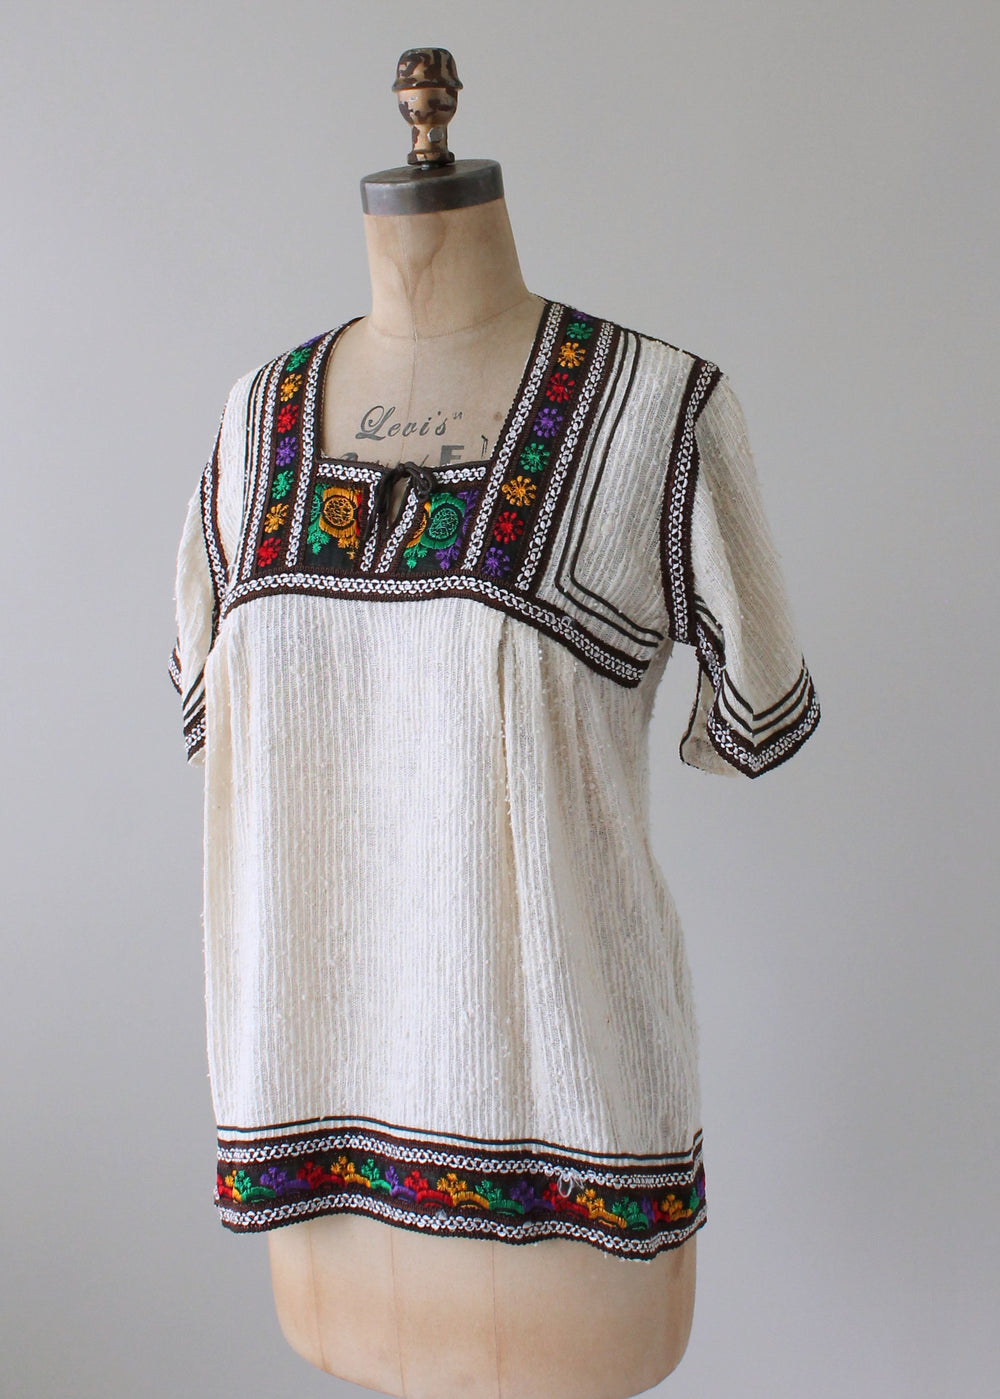 Vintage 1970s Embroidered Nubbly Cotton Shirt - Raleigh Vintage